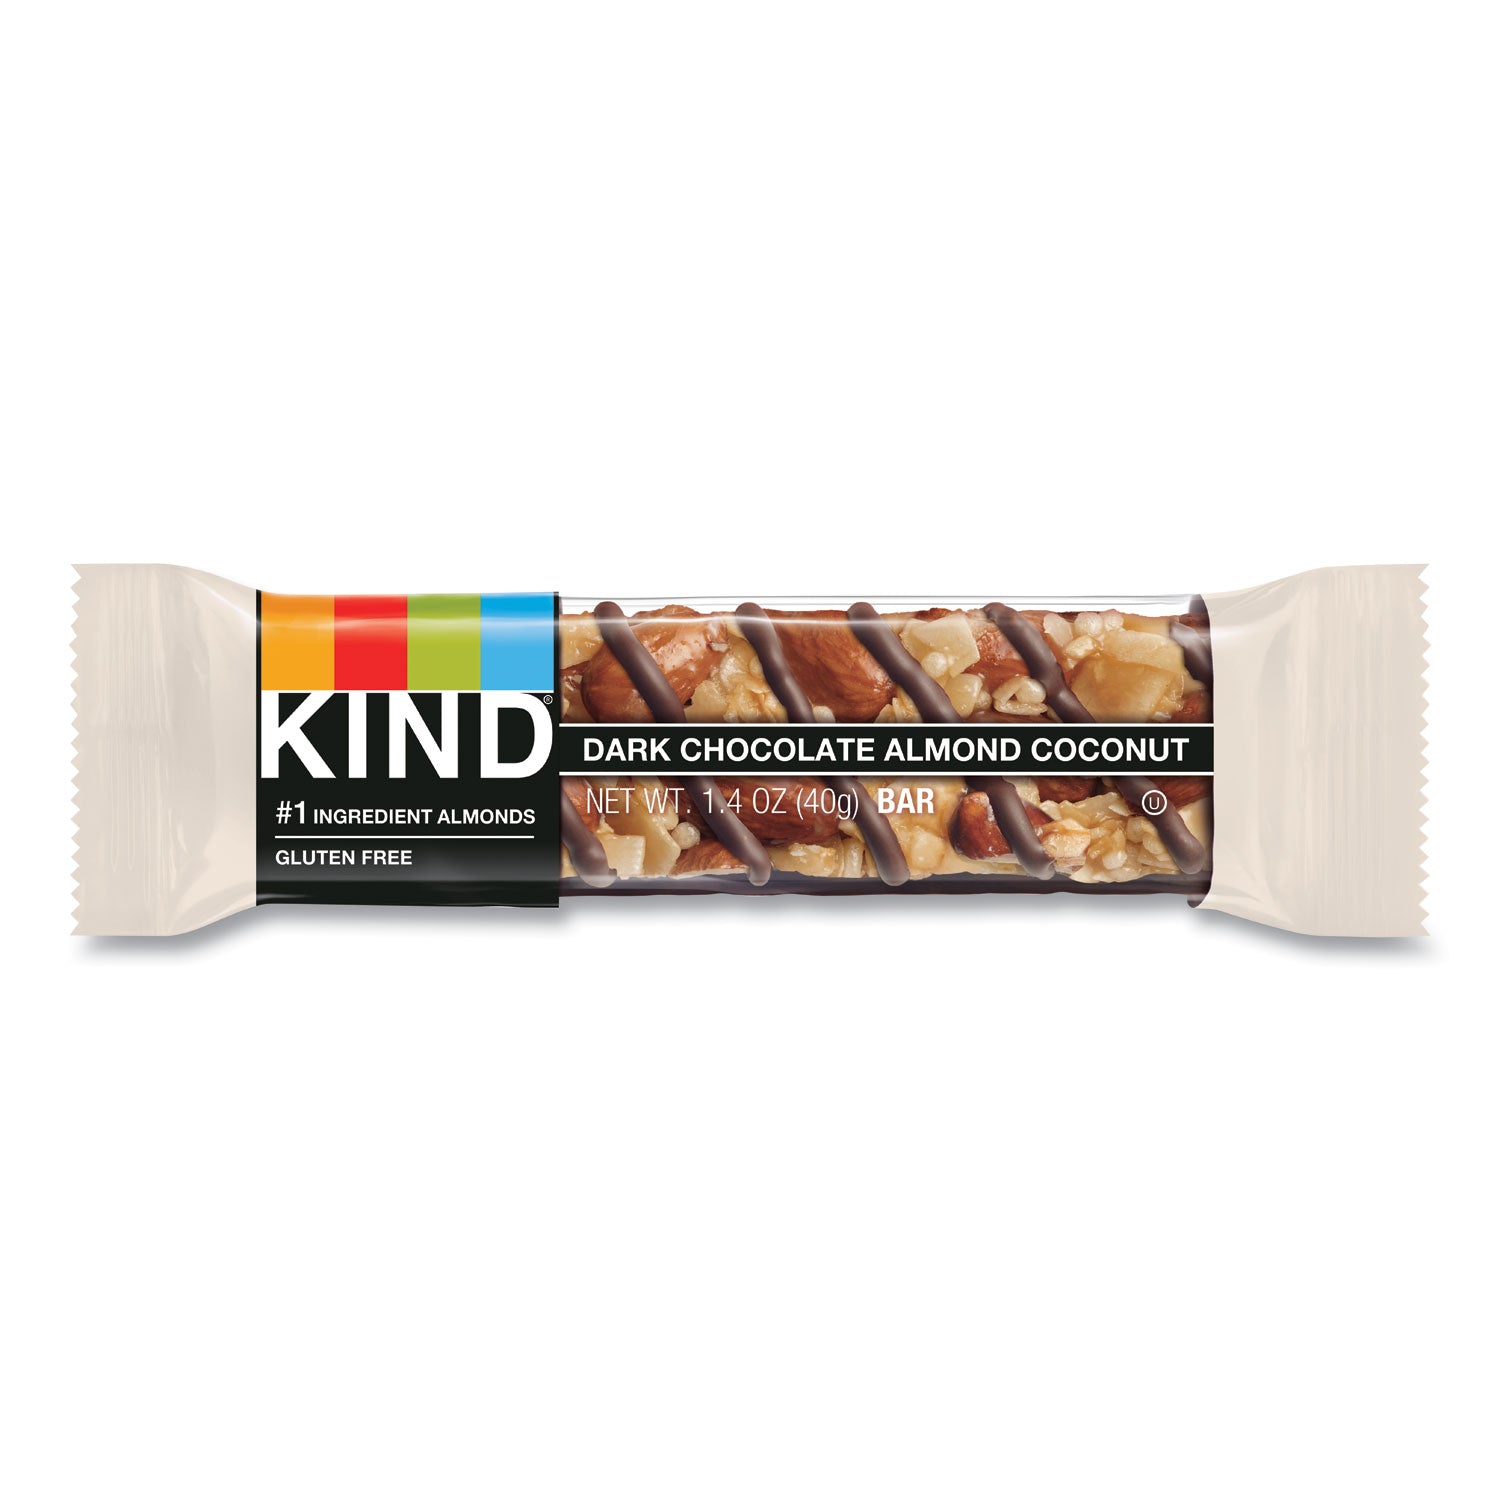 fruit-and-nut-bars-dark-chocolate-almond-and-coconut-14-oz-bar-12-box_knd19987 - 2